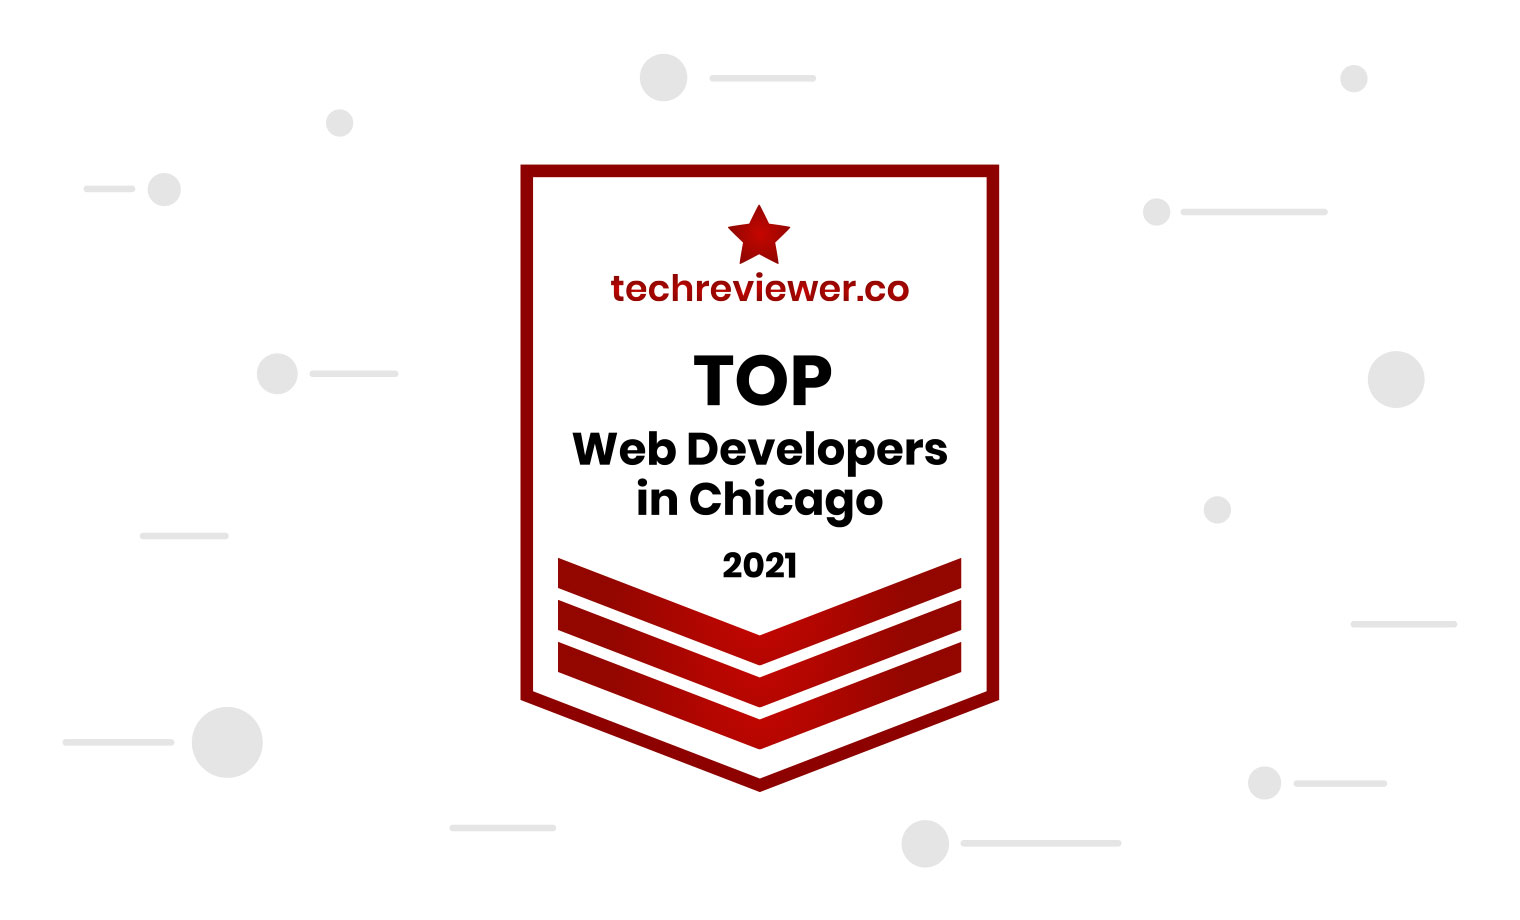 Blue Flame Thinking Named to List of 2021 Top Web Development Companies in Chicago